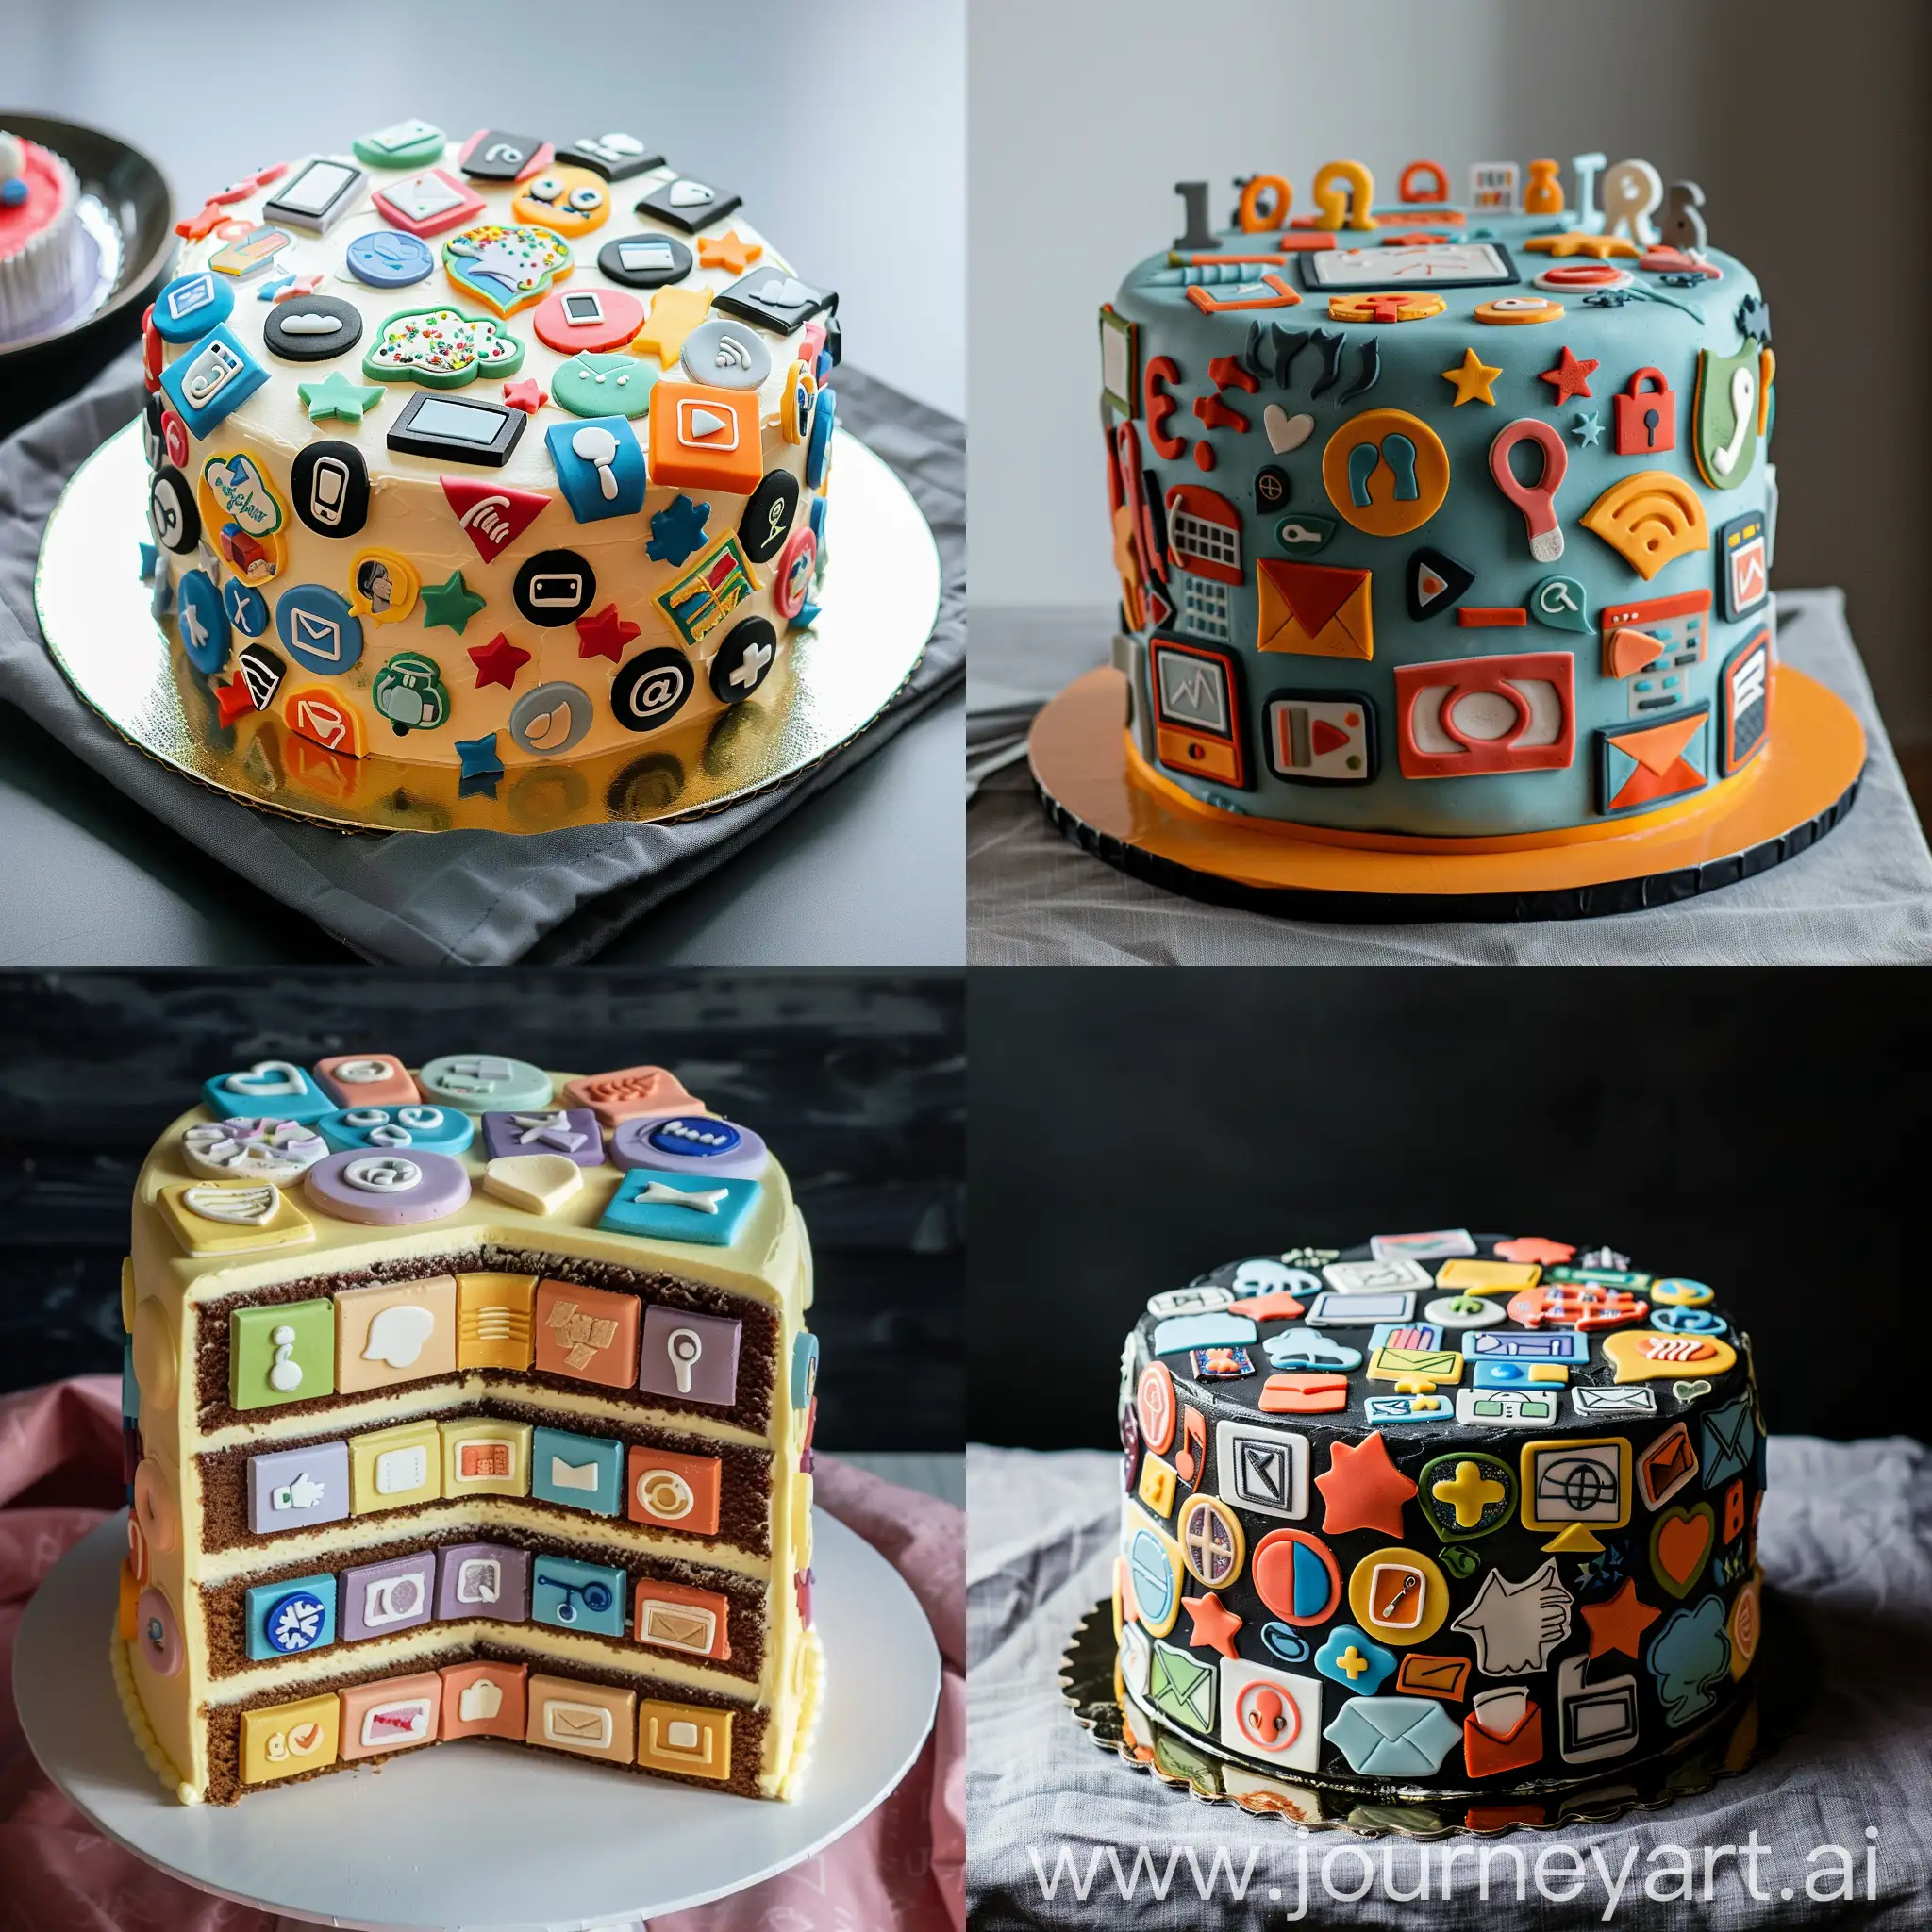 cake made with digital marketing icons